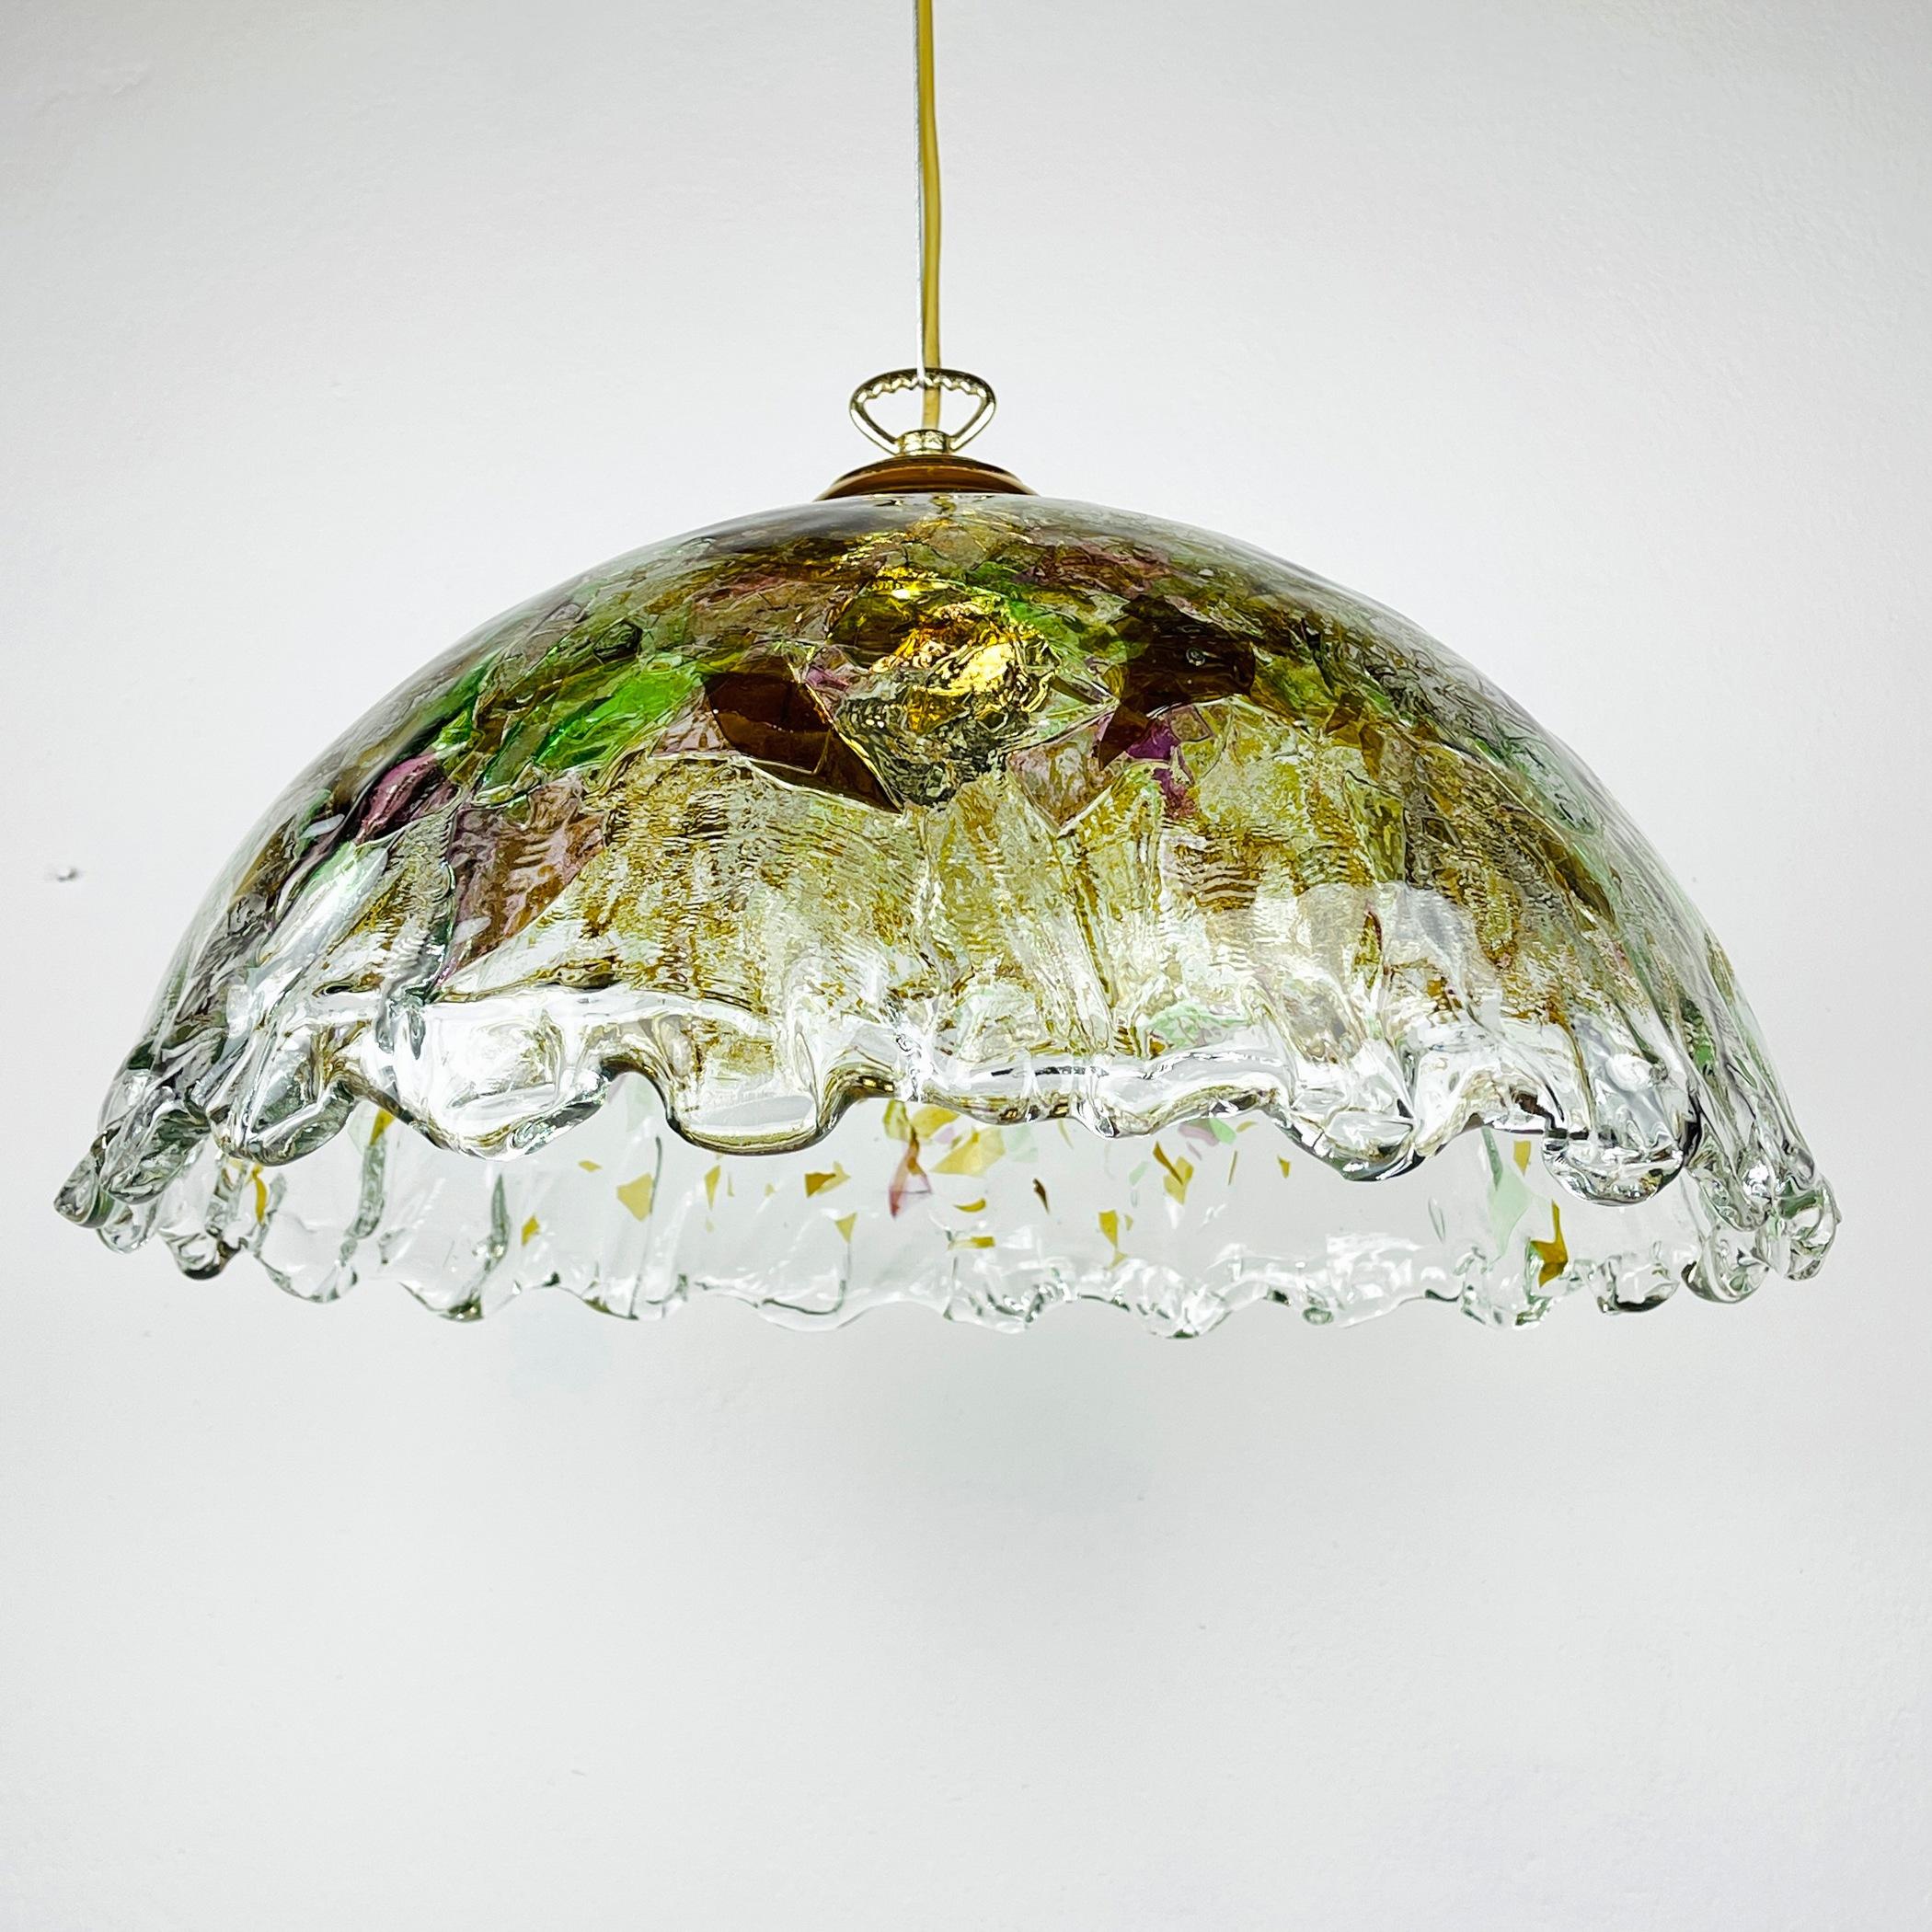 The stunning vintage huge murano pendant lamp was produced by the Italian company 